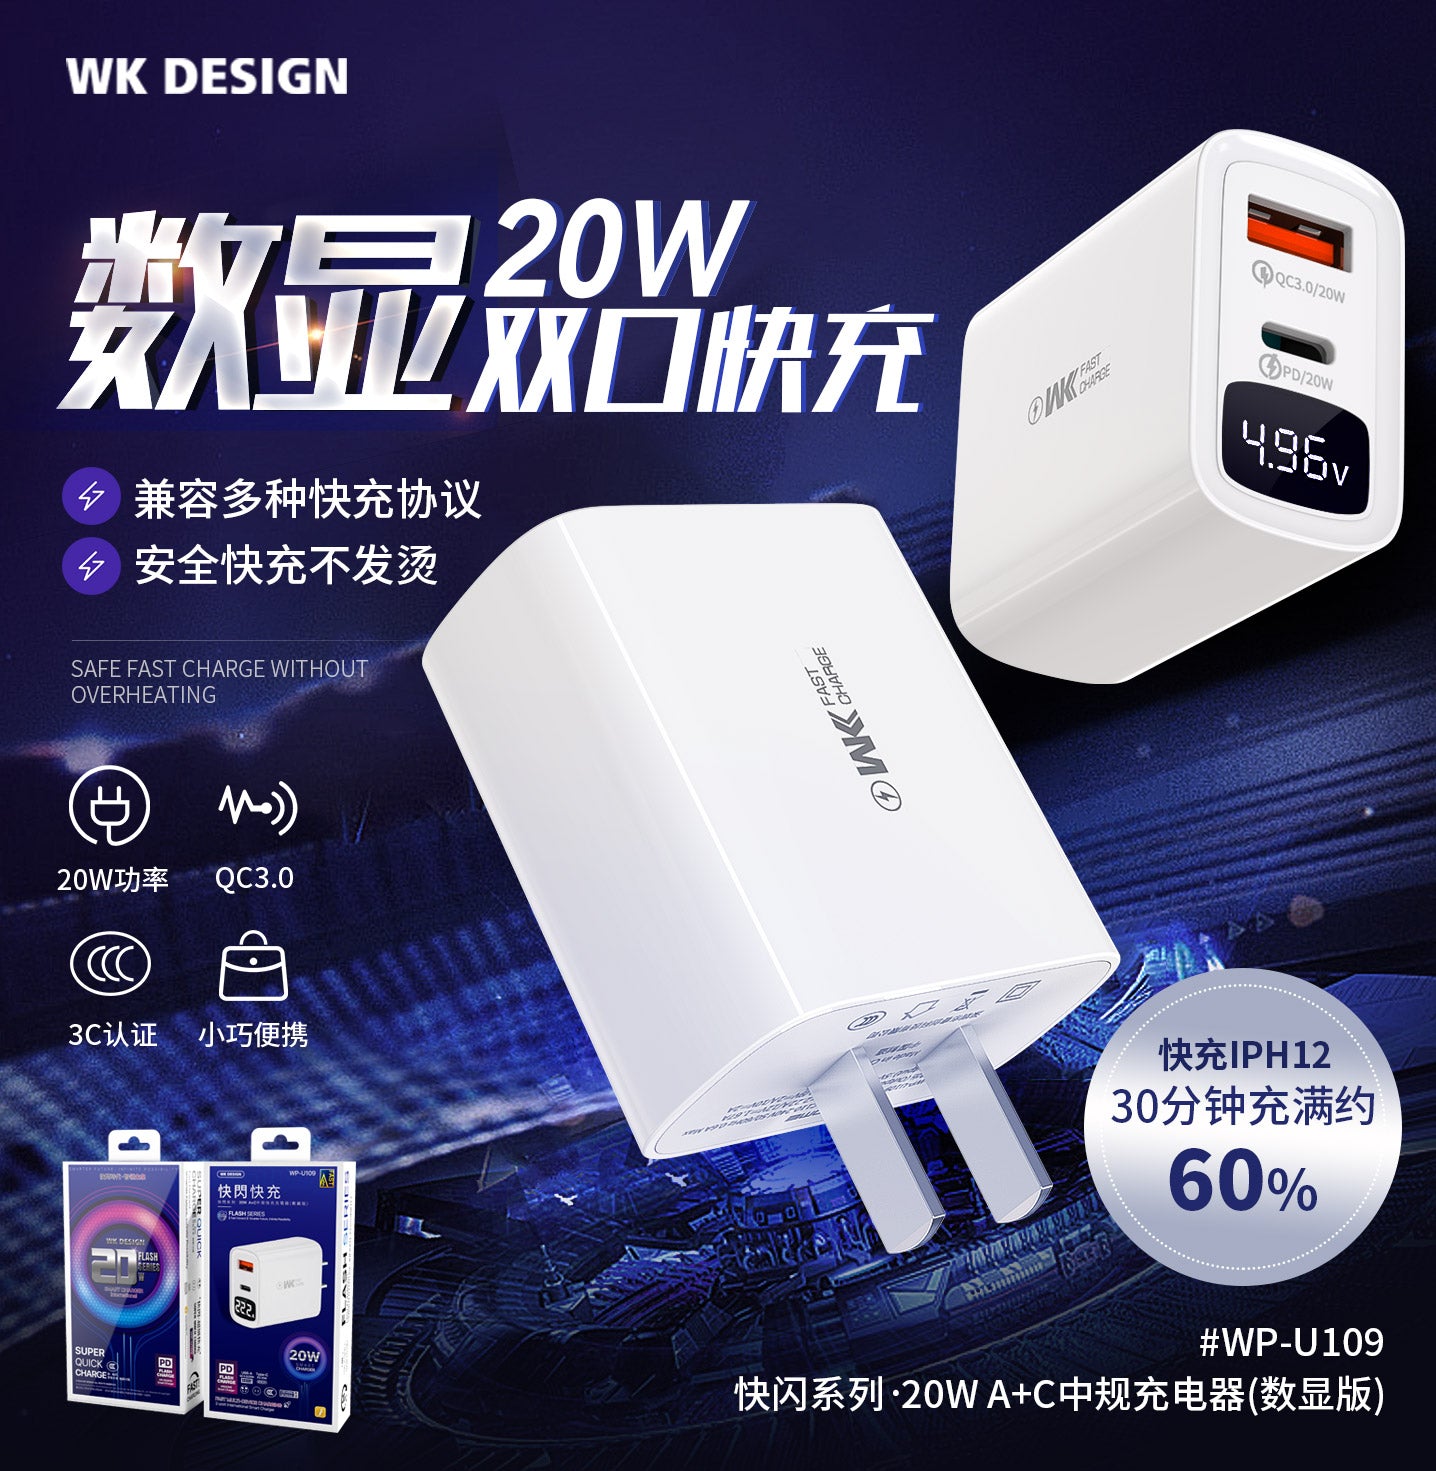 WP-U109 Flash Series PD 20W A+C Charger